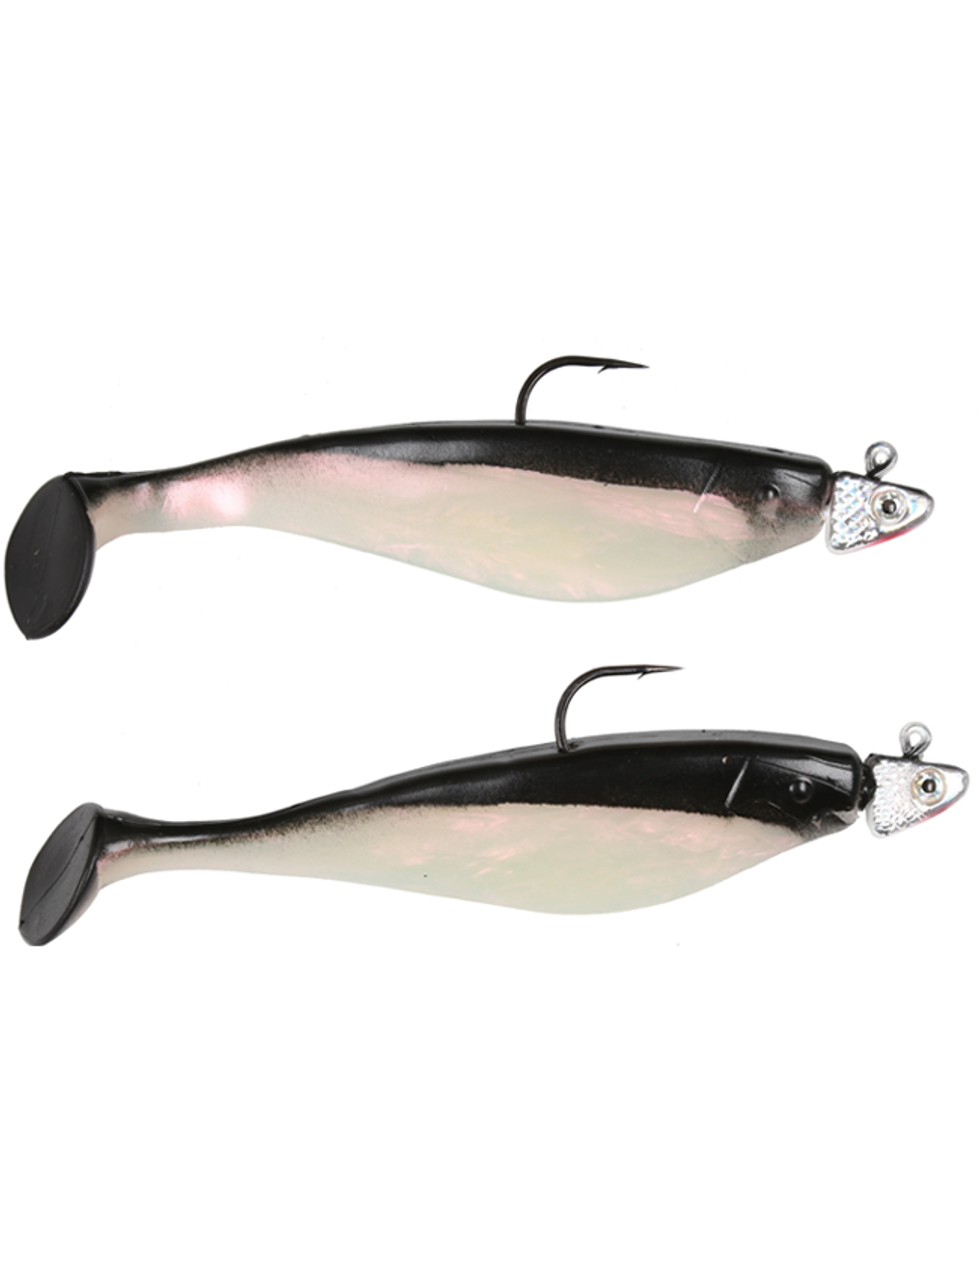 Mister Twister Rigged 6 Sassy Shads - Black and White